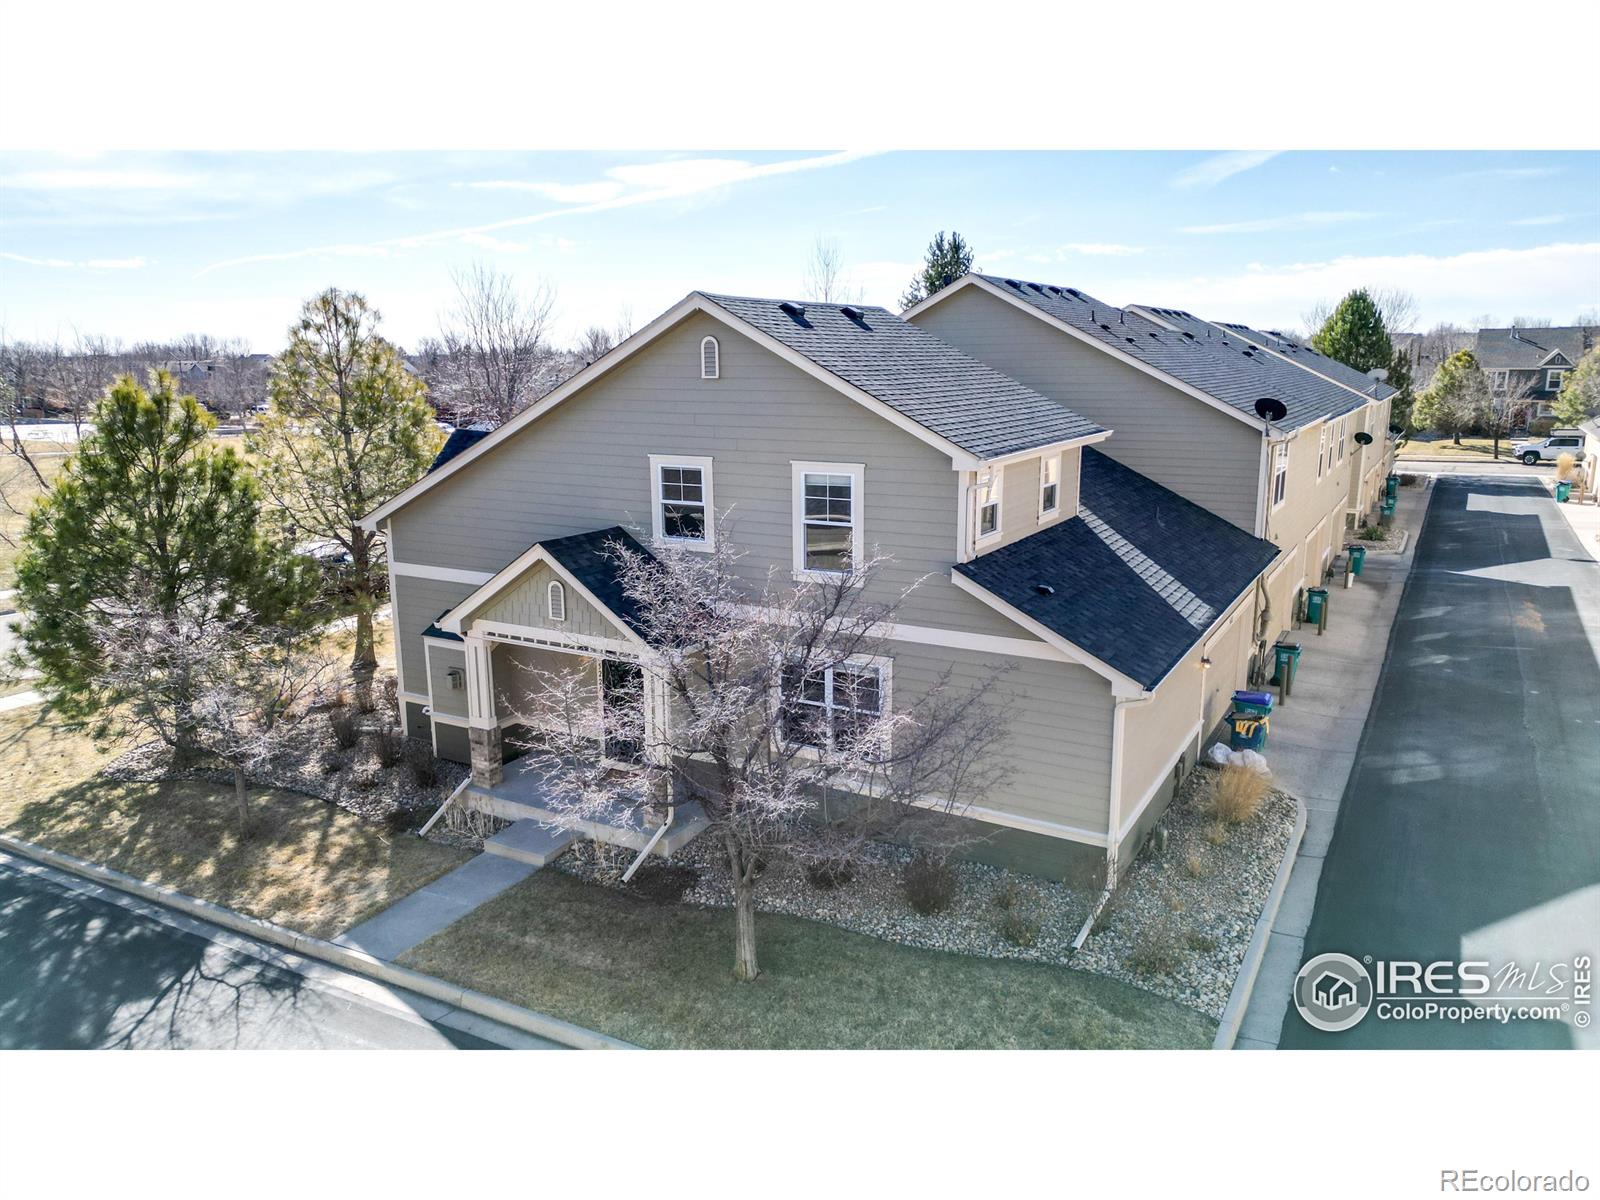 5227  Mill Stone Way, fort collins MLS: 4567891004326 Beds: 3 Baths: 3 Price: $500,000